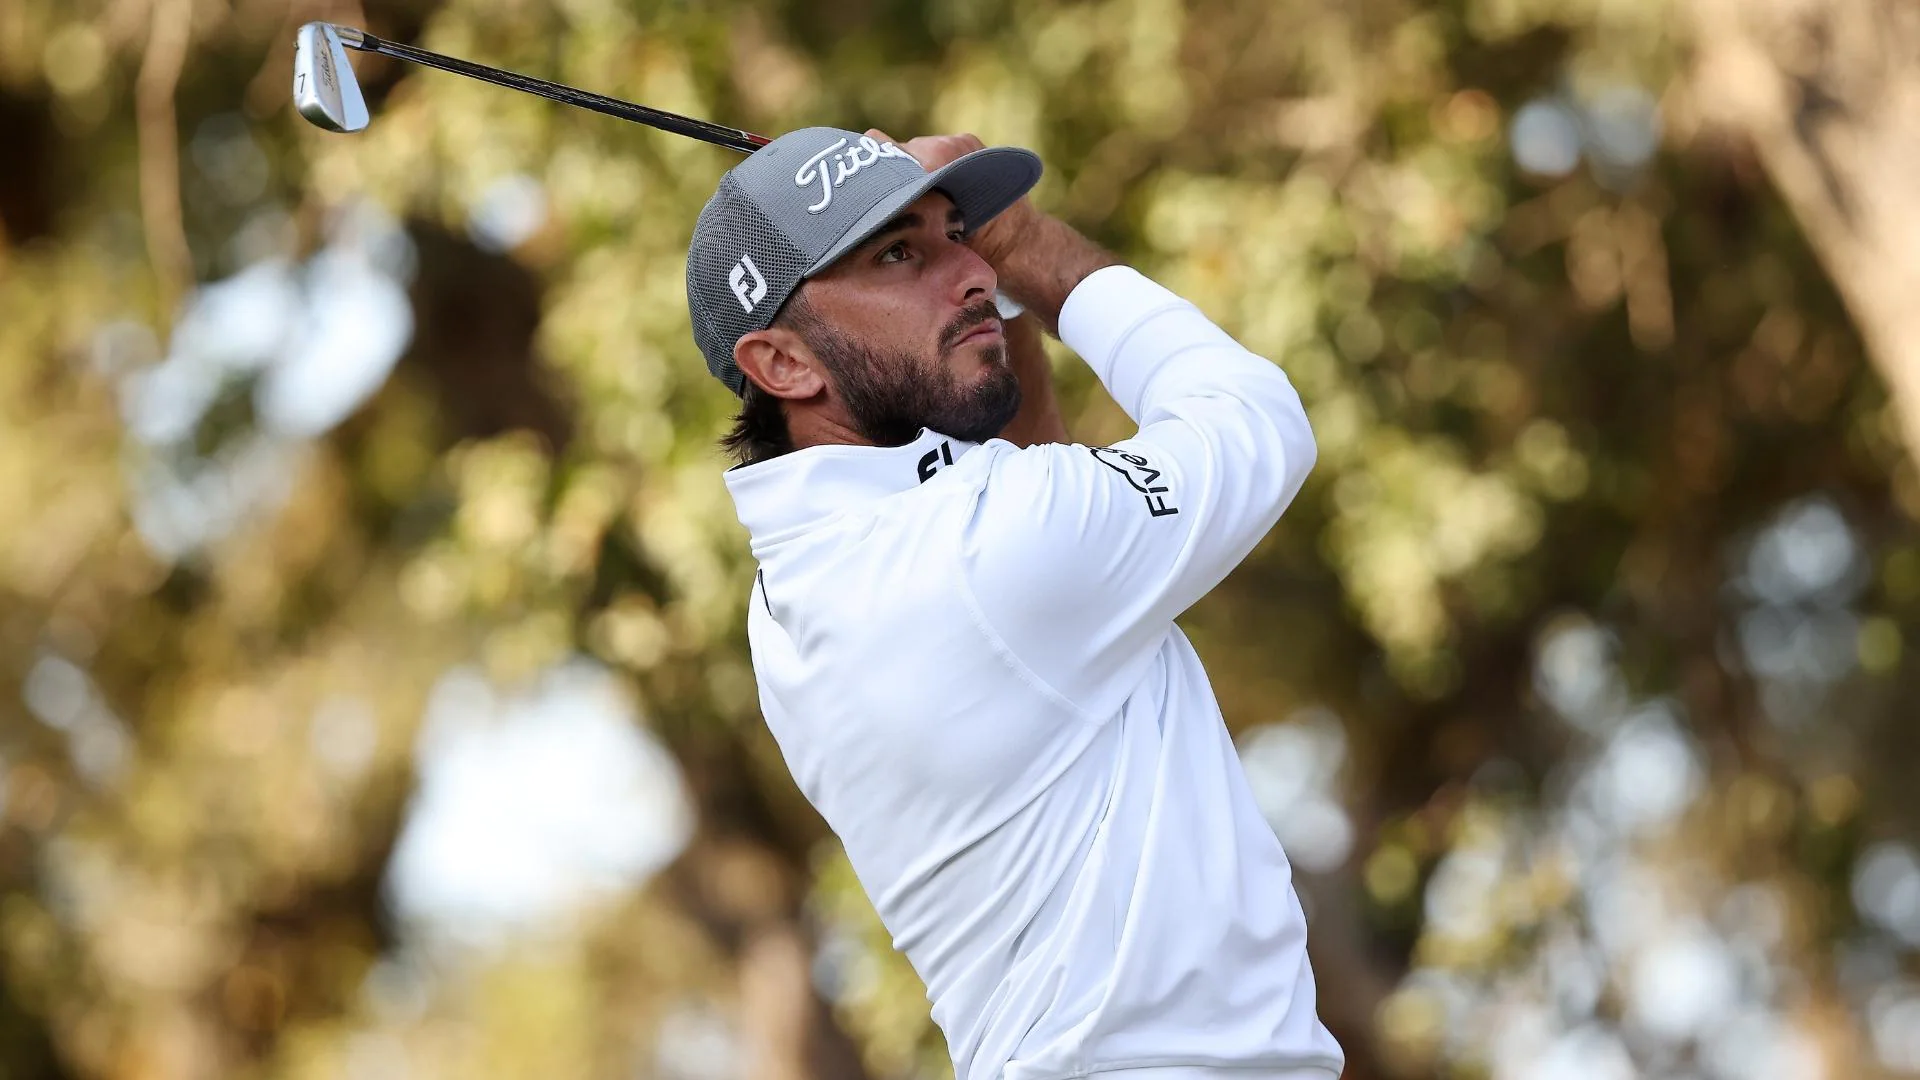 Defending champ Max Homa, Danny Willett share lead at Fortinet Championship